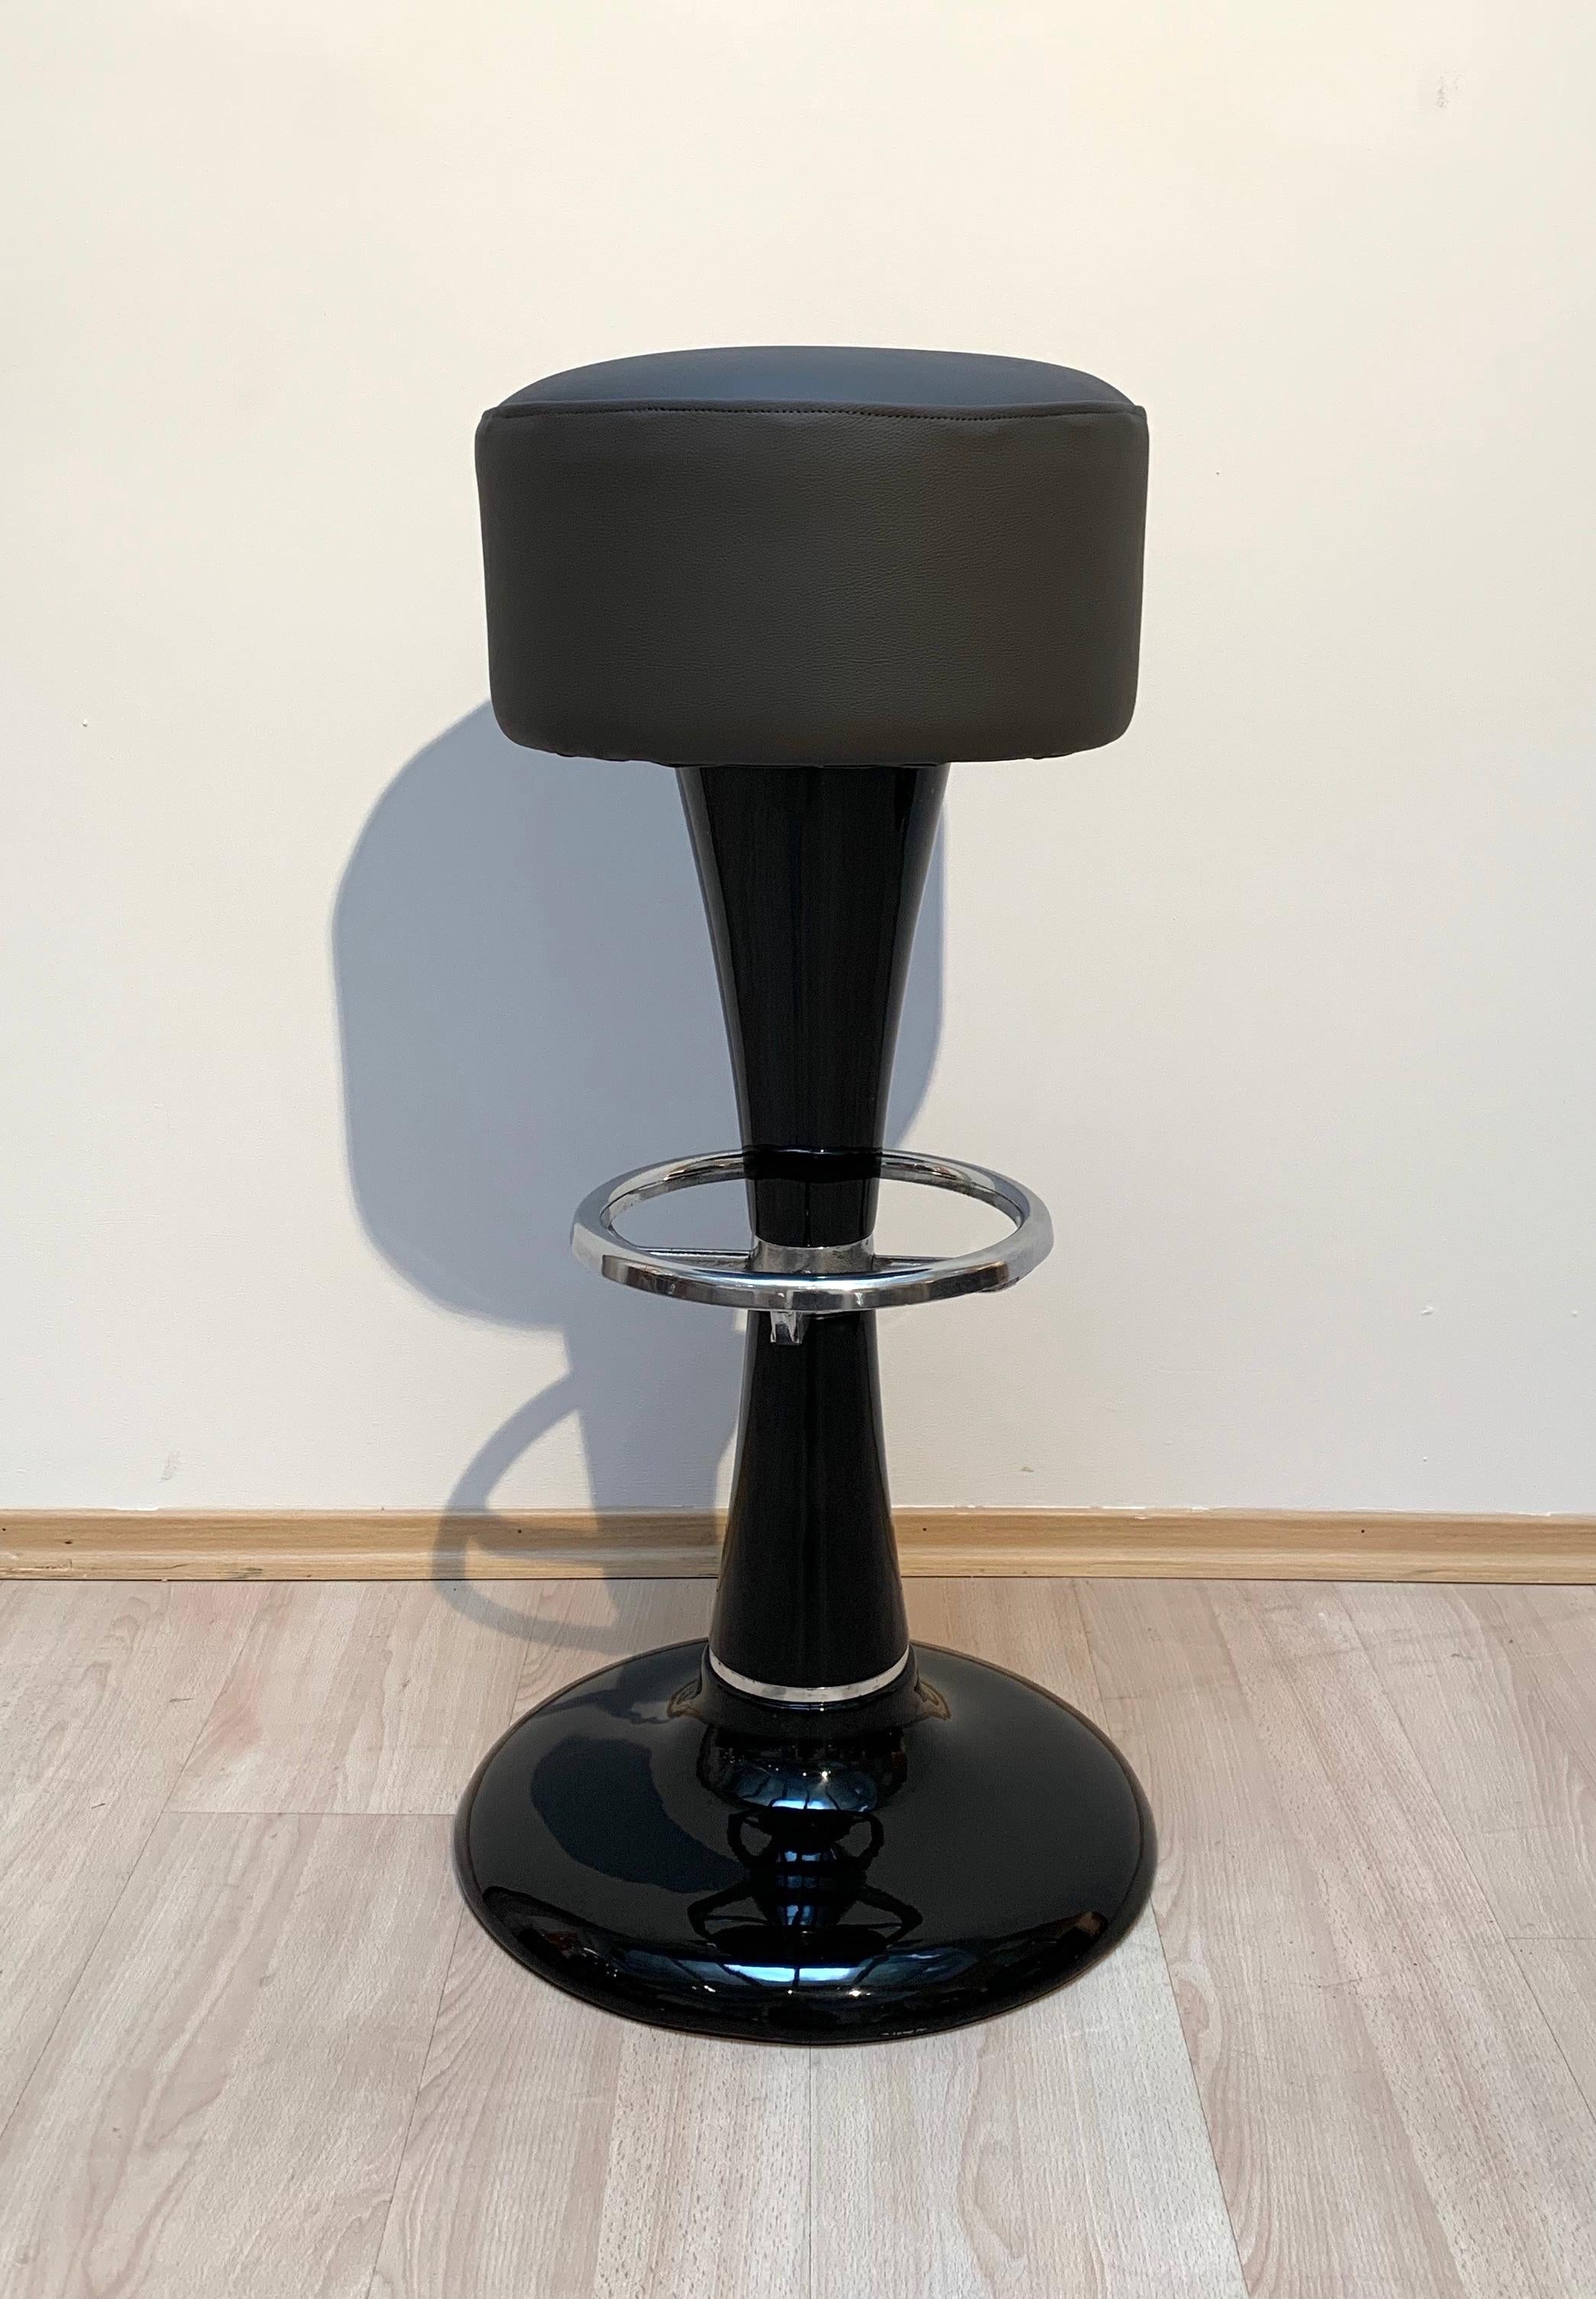 Metal Barstools, Black Lacquer, Chrome, Grey Leather, France, 1950s In Good Condition For Sale In Regensburg, DE